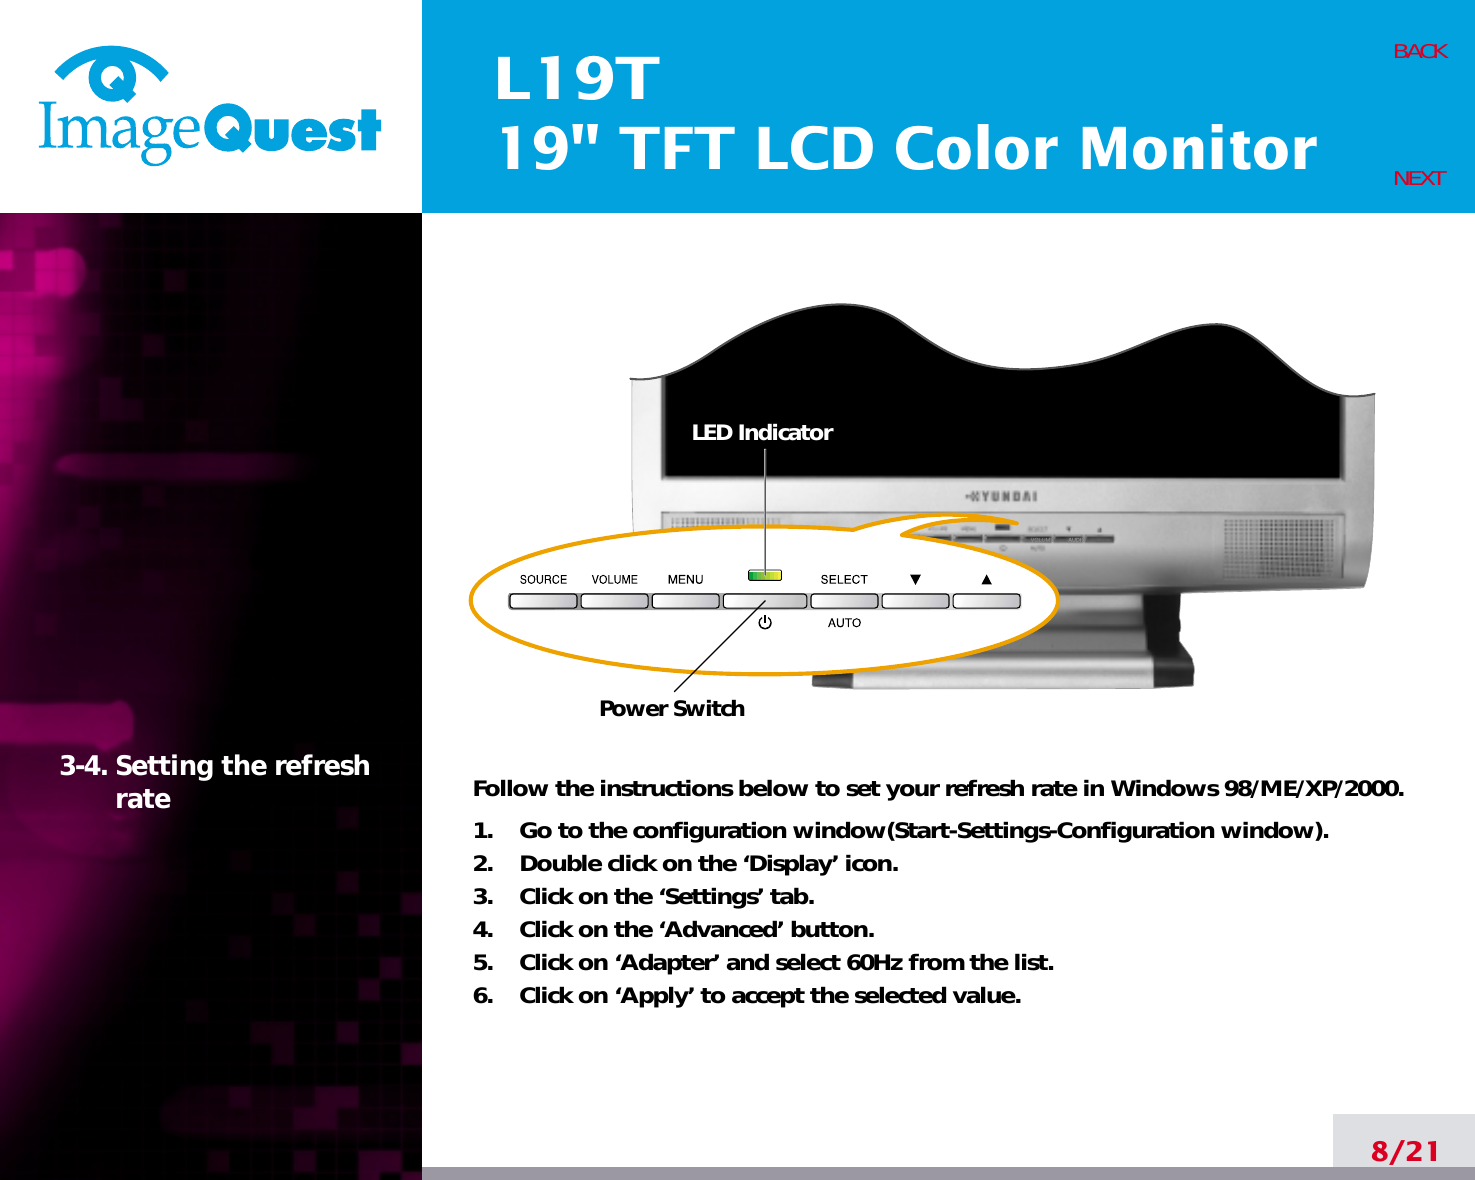 L19T19&quot; TFT LCD Color Monitor8/21BACKNEXT3-4. Setting the refreshrate Follow the instructions below to set your refresh rate in Windows 98/ME/XP/2000.1.    Go to the configuration window(Start-Settings-Configuration window).2.    Double click on the ‘Display’ icon.3.    Click on the ‘Settings’ tab.4.    Click on the ‘Advanced’ button.5.    Click on ‘Adapter’ and select 60Hz from the list.6.    Click on ‘Apply’ to accept the selected value.Power SwitchLED Indicator